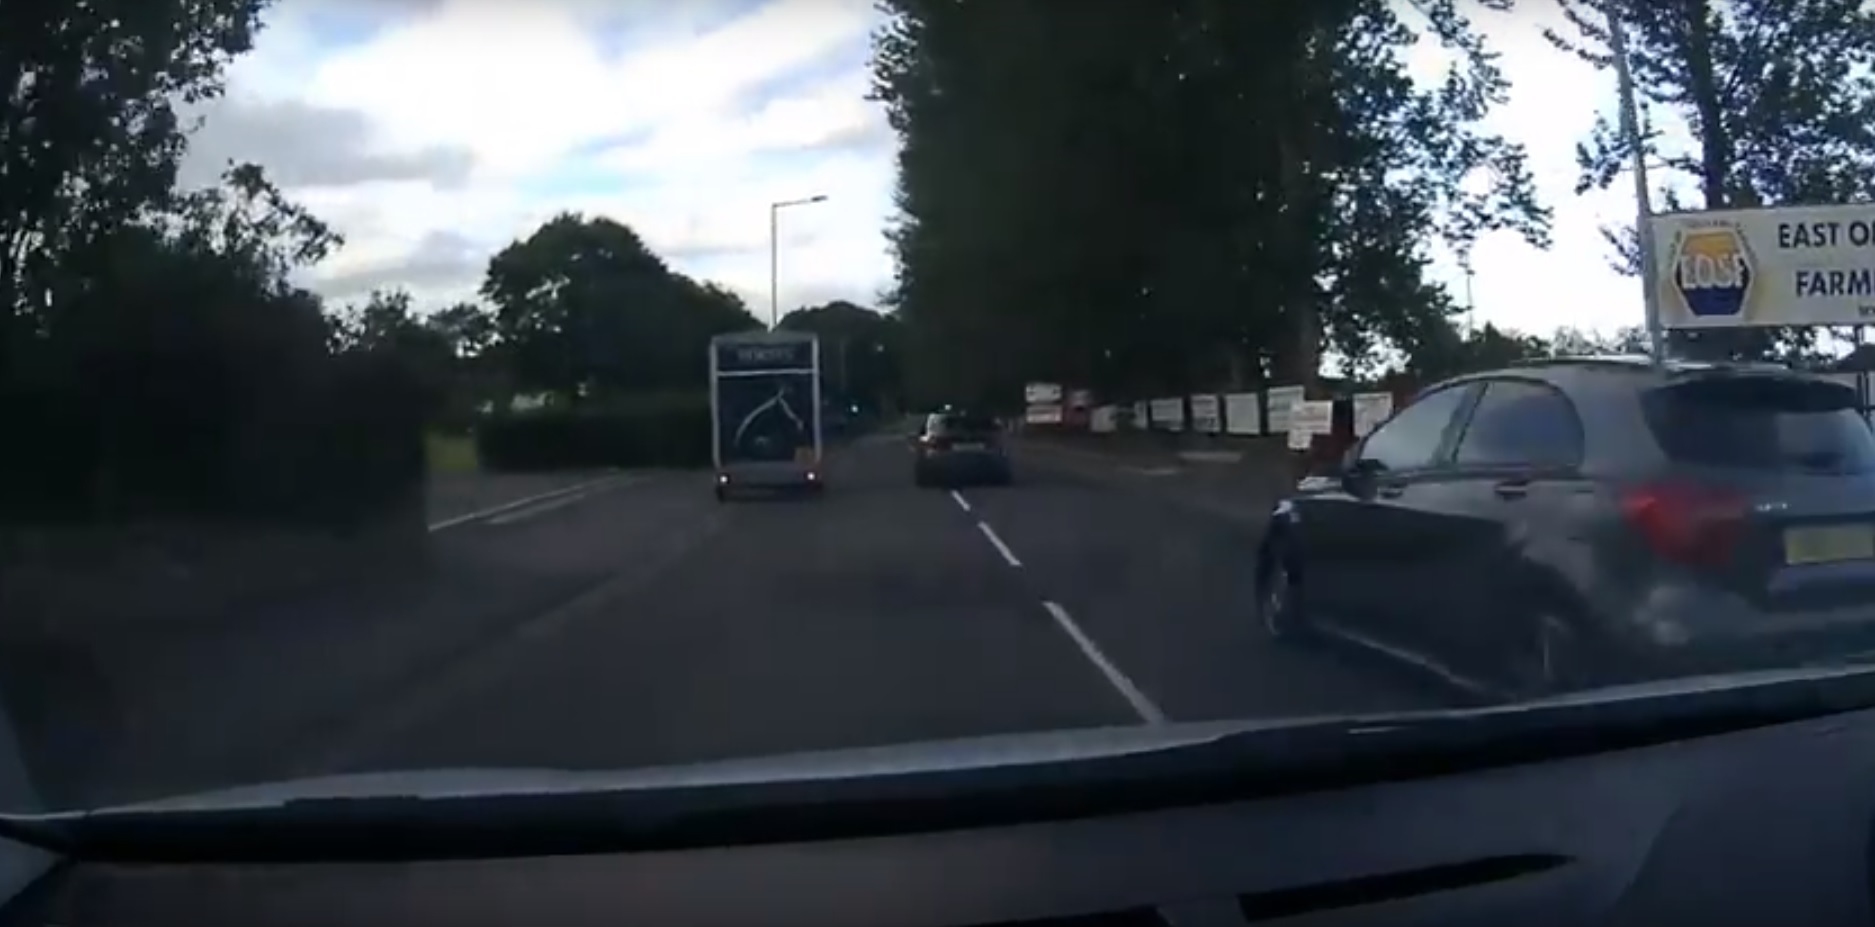 The silver vehicle passes after the dash cam vehicle has already moved out to pass the stationary horsebox.